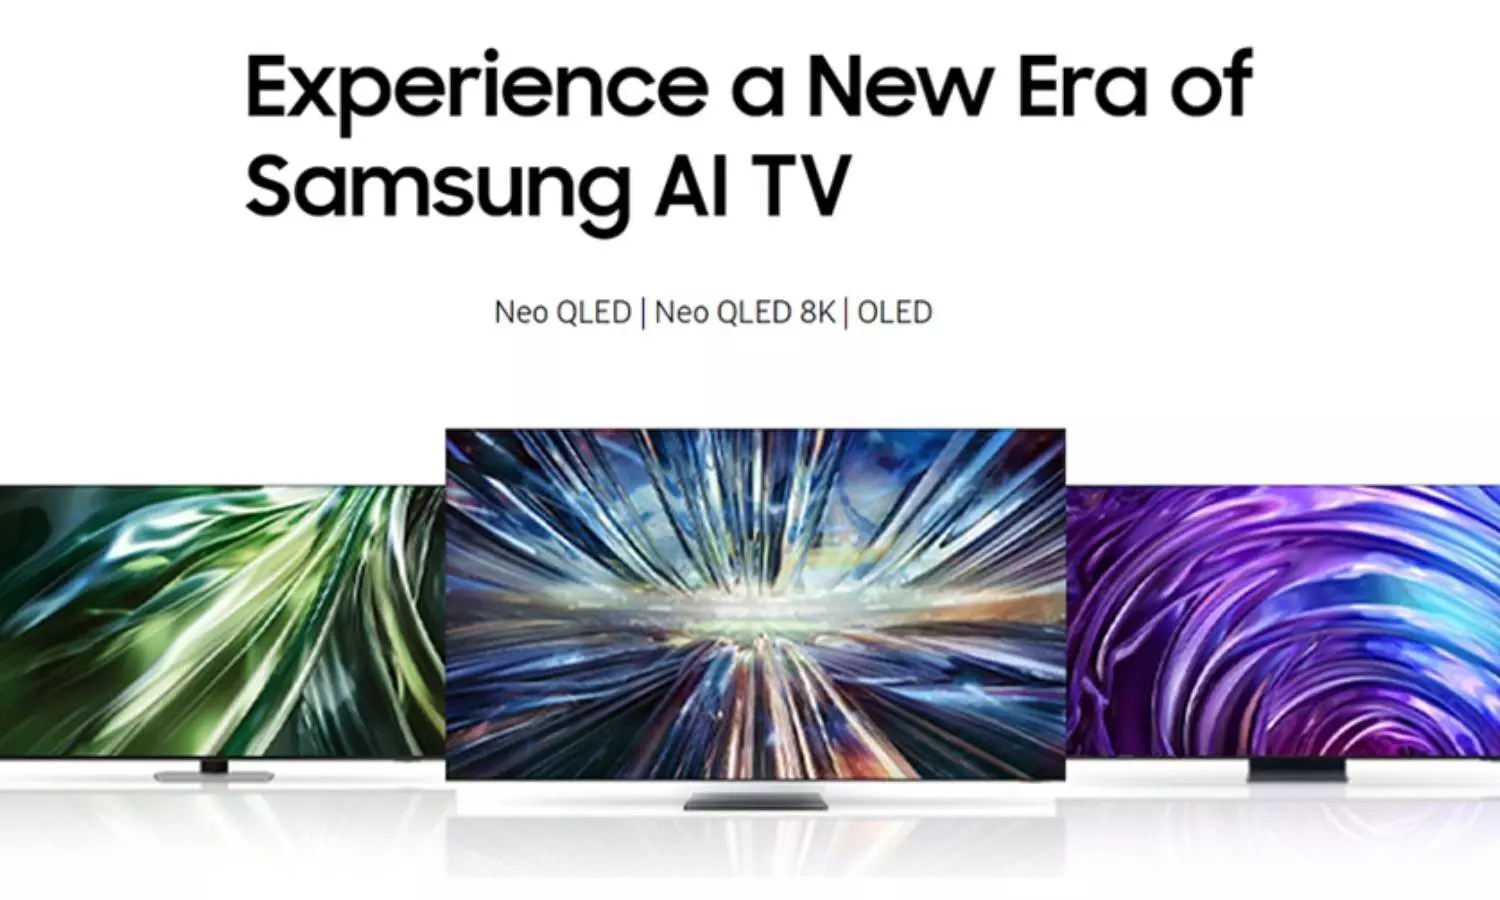 Samsung Unveils Next-Generation TV Lineup in India: Neo QLED 8K, Neo QLED 4K, and OLED Models